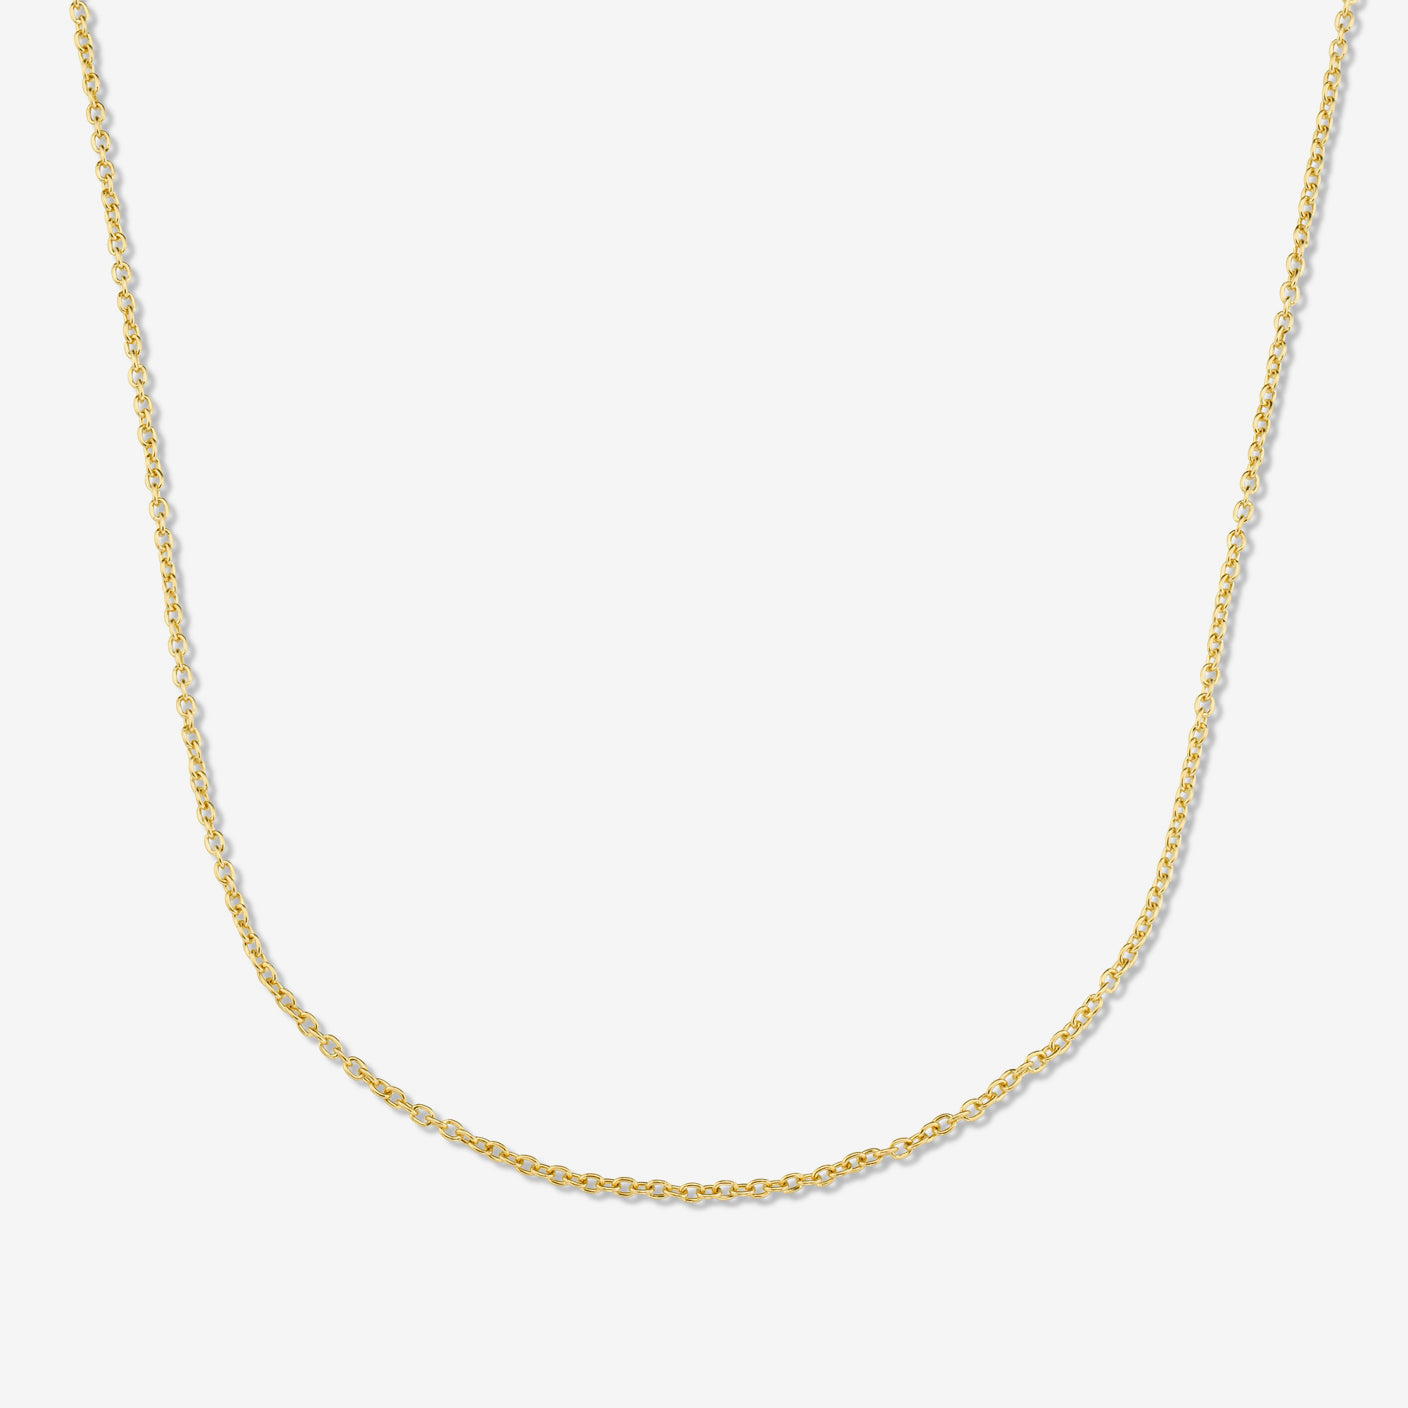 14K GOLD-FILLED CLASSIC CHAIN